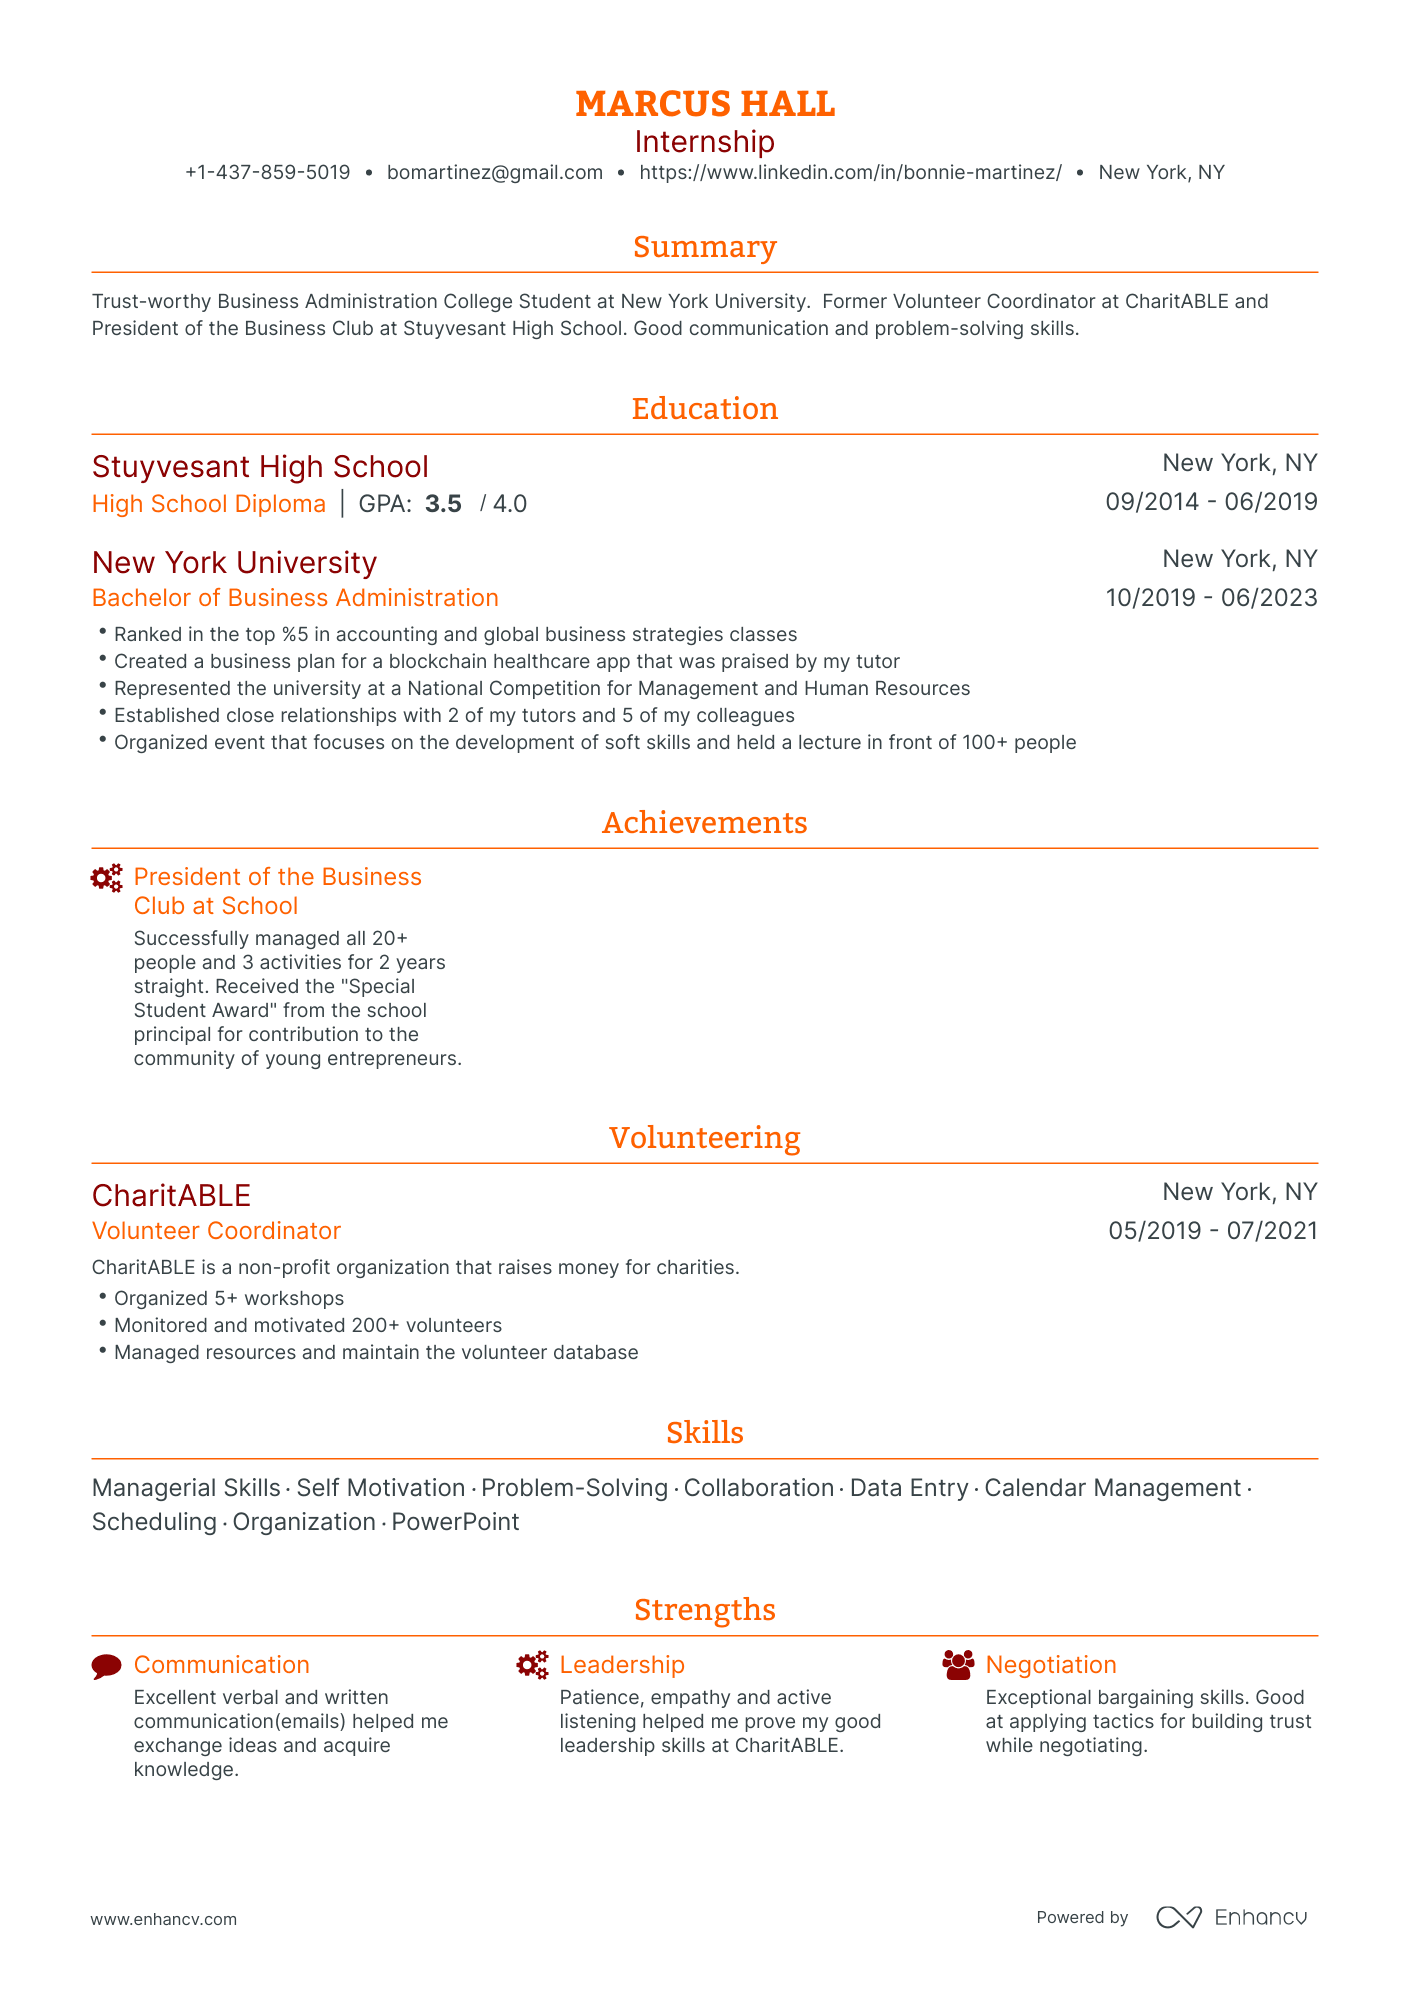 Traditional Intern Resume Template